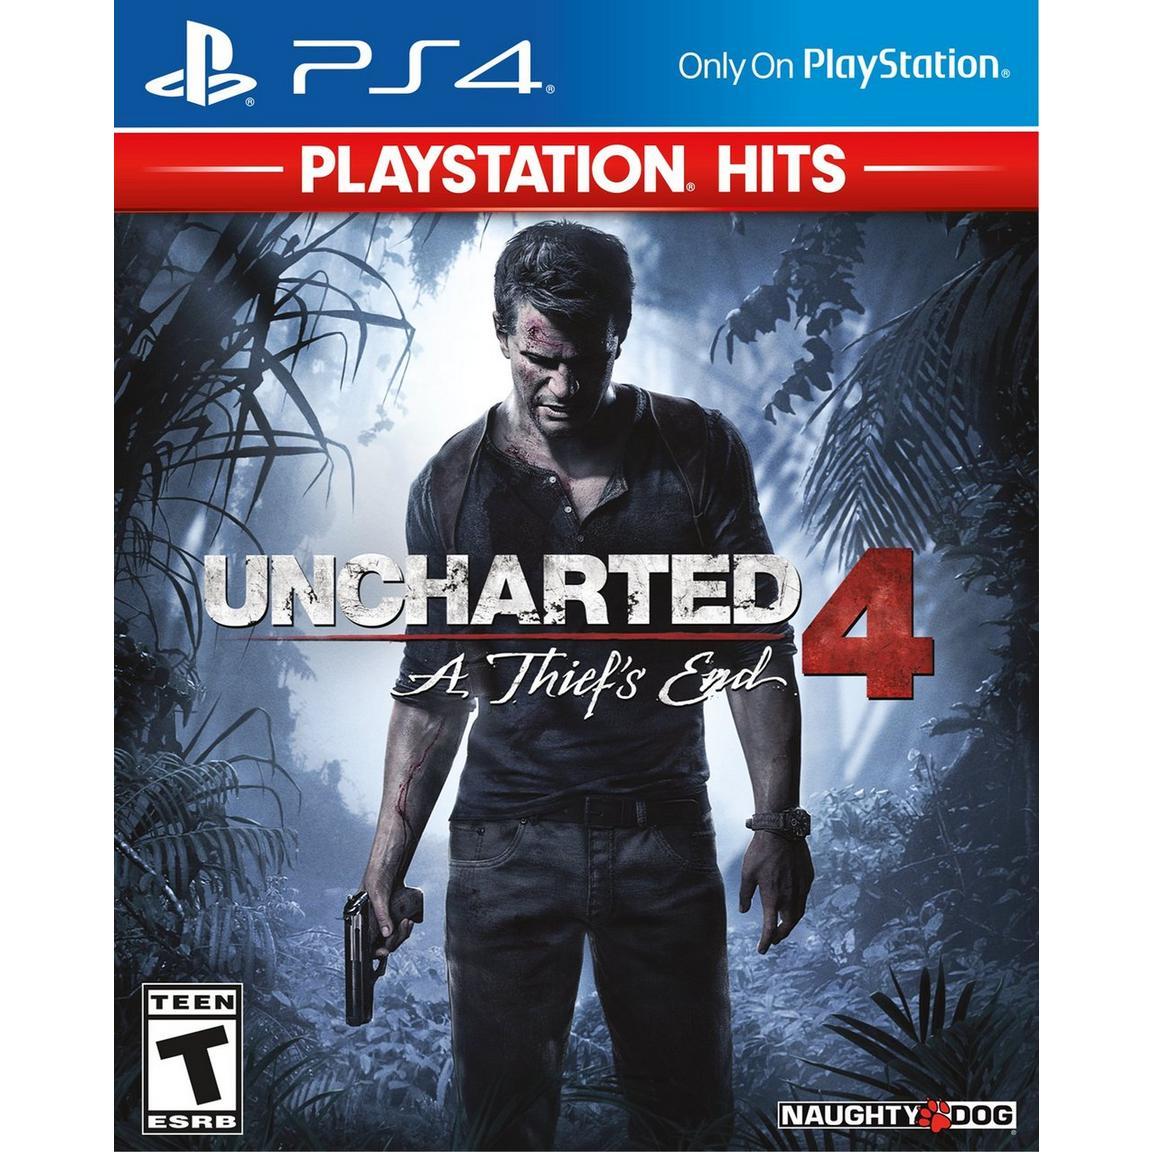 Uncharted 4 A Thiefs End PS4 for $4.99